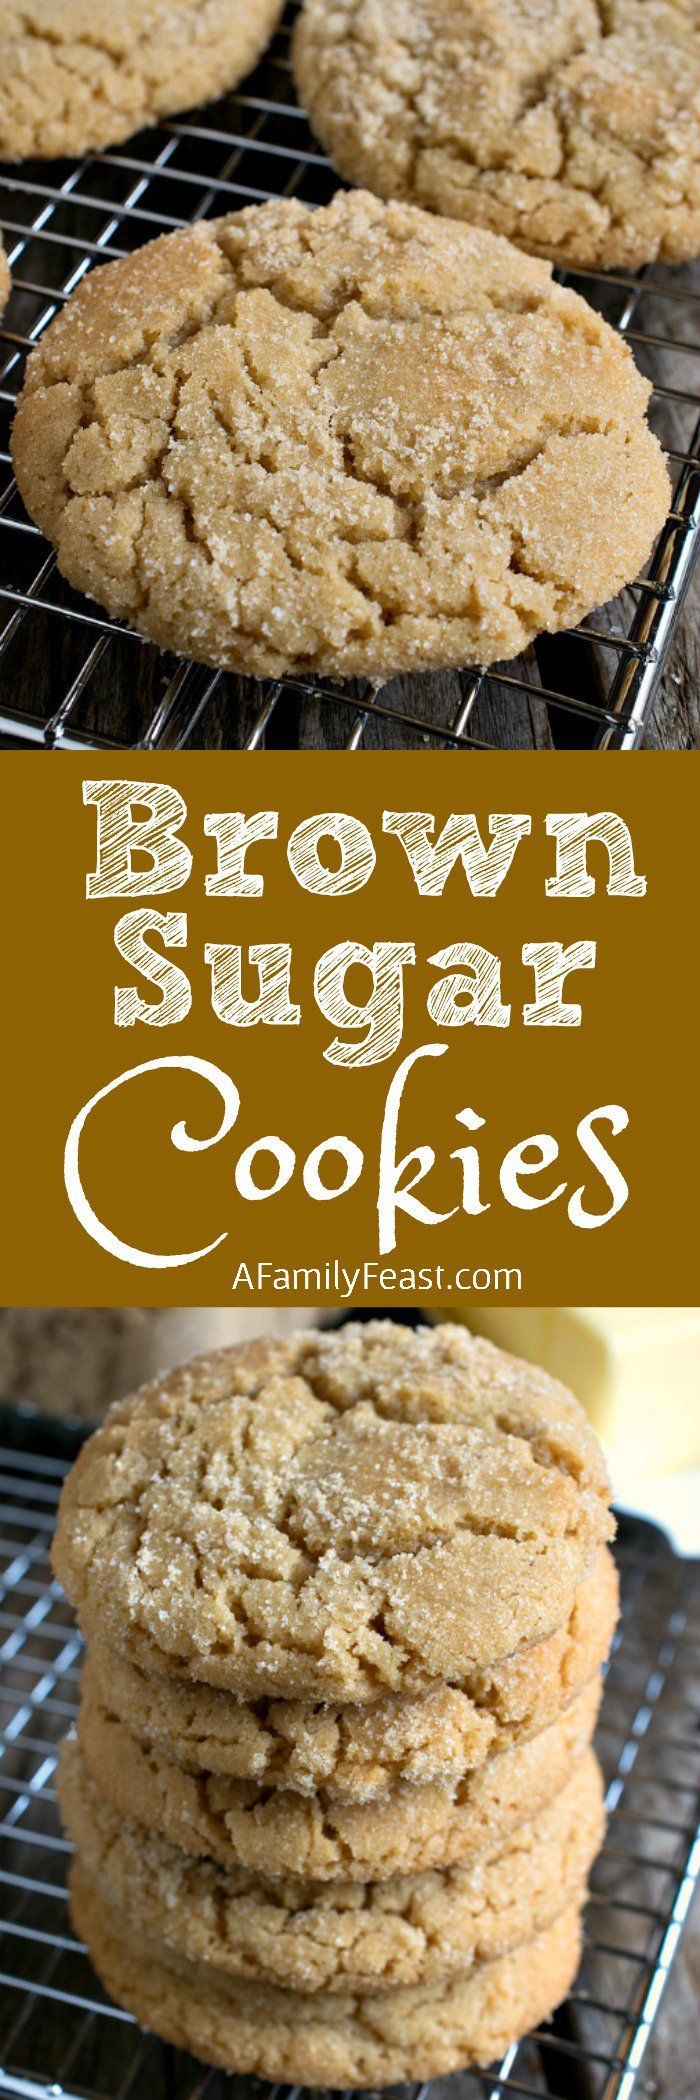 Brown Sugar Cookies are a clever twist on the traditional sugar cookie recipe than